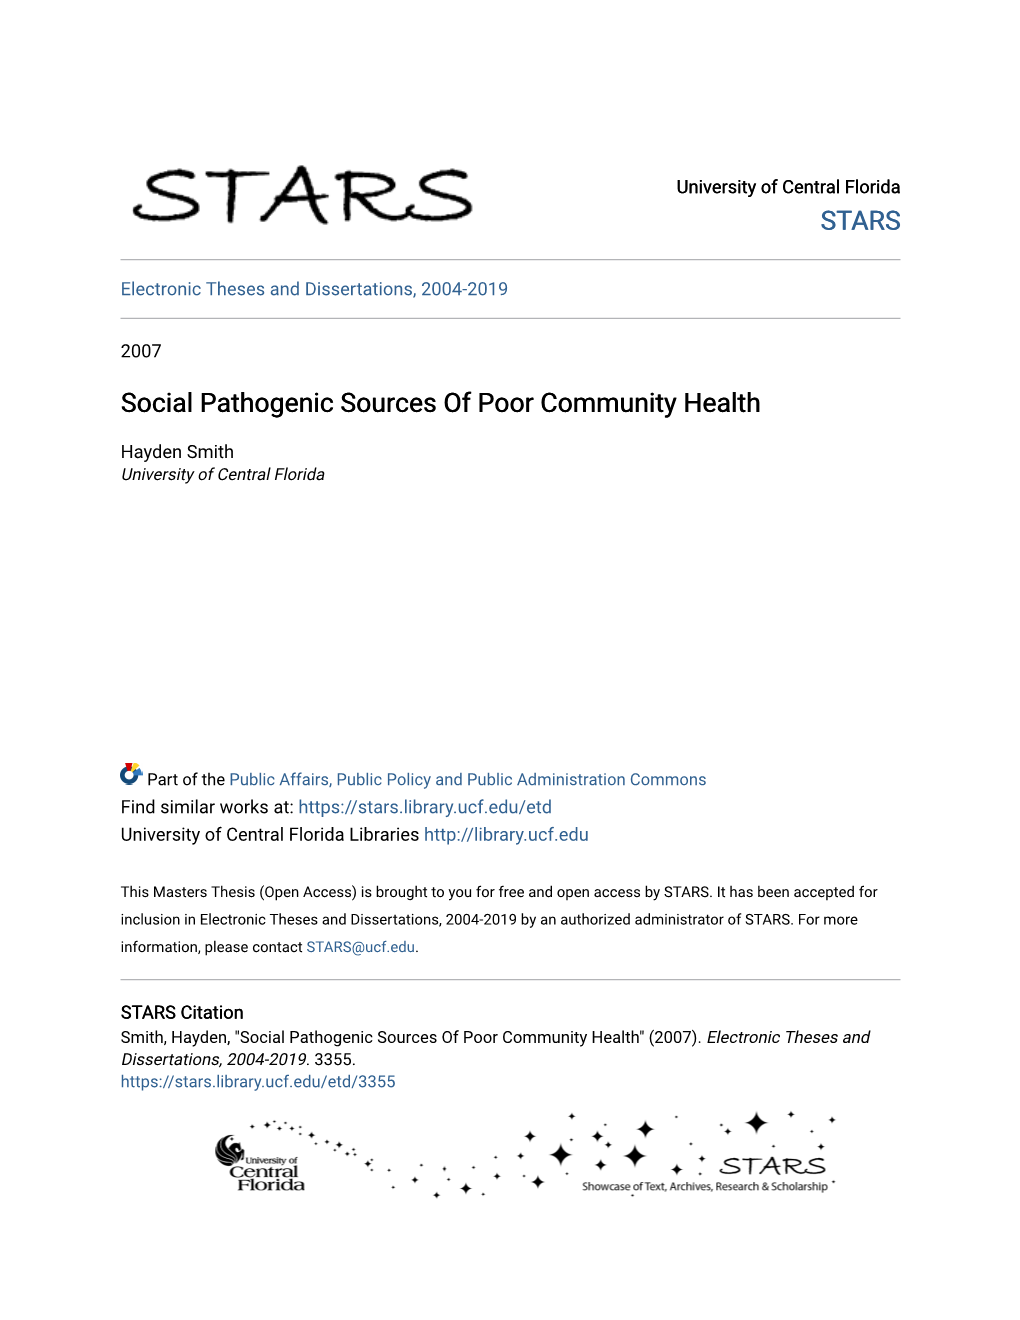 Social Pathogenic Sources of Poor Community Health